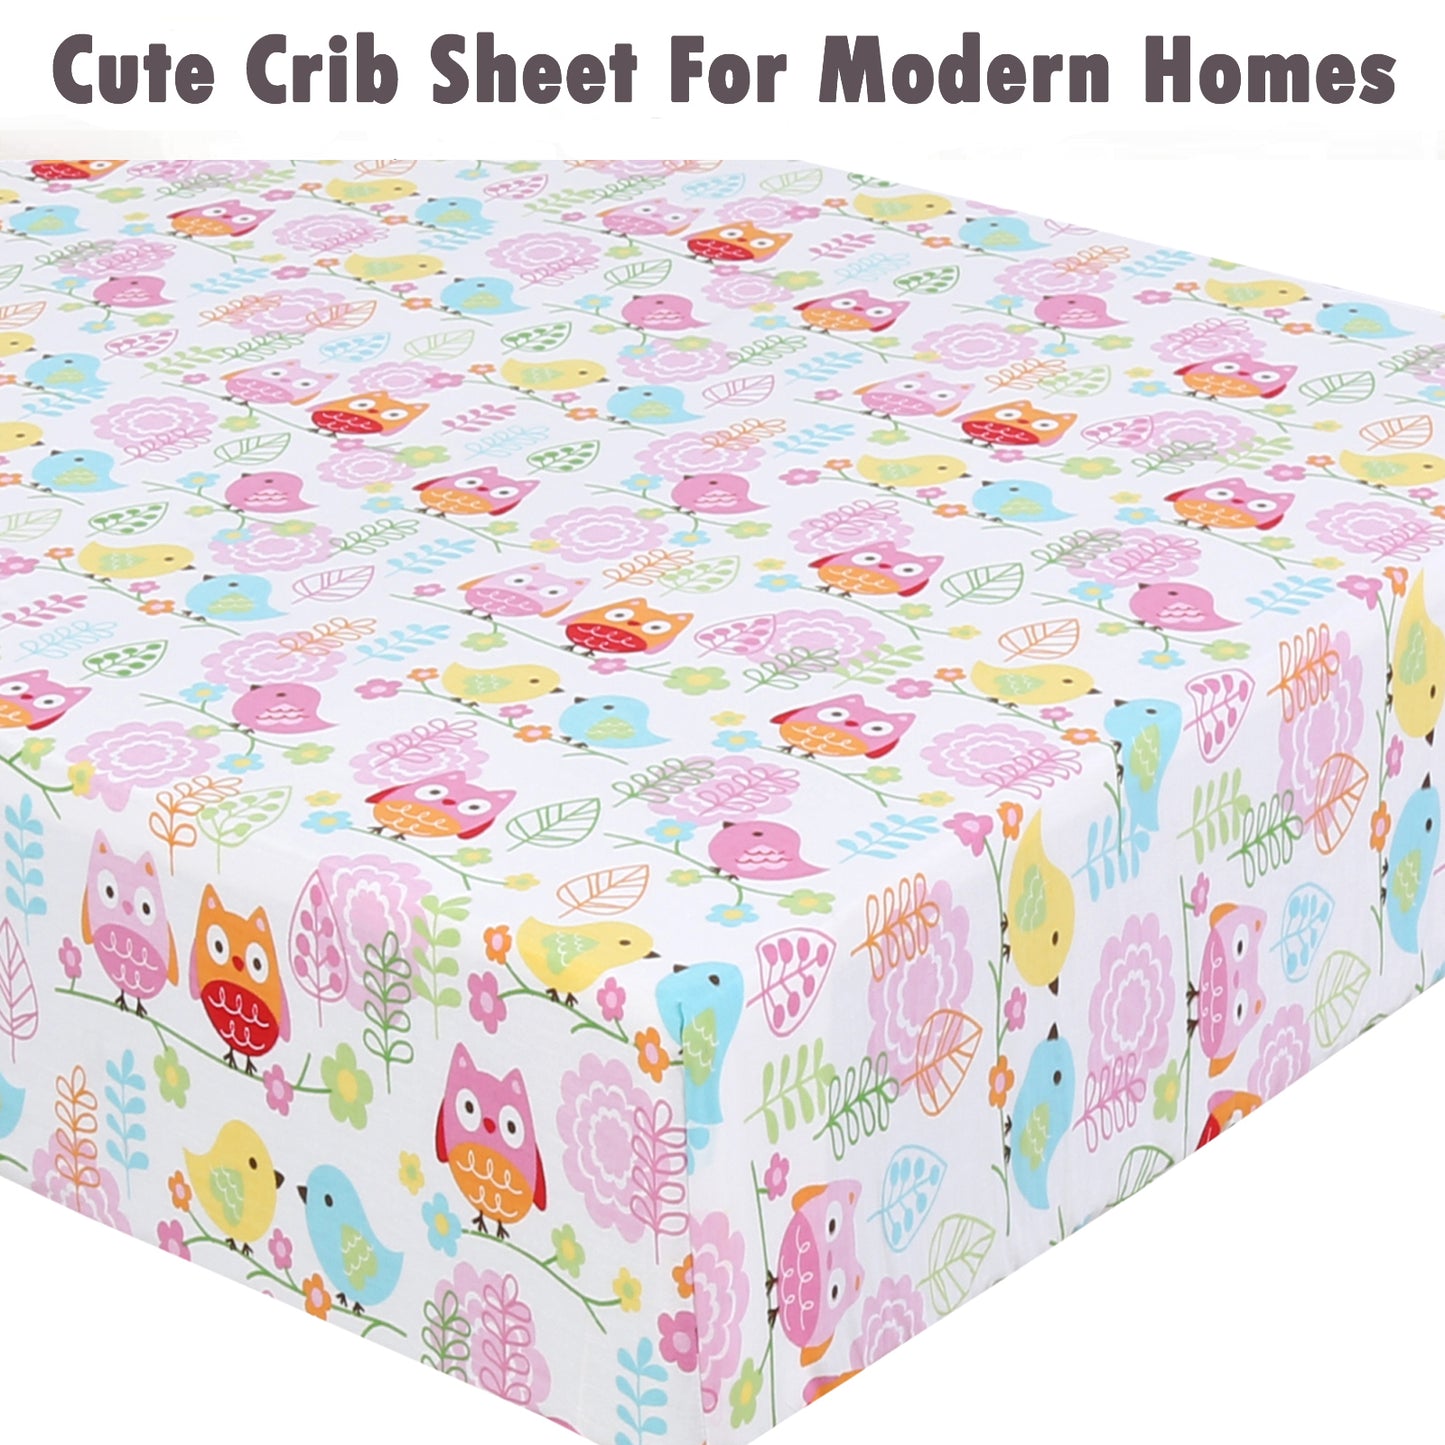 3 Piece Crib/Toddler Cotton Fitted Sheets Pink Colorful Owls Birds Zoo Animals Heart